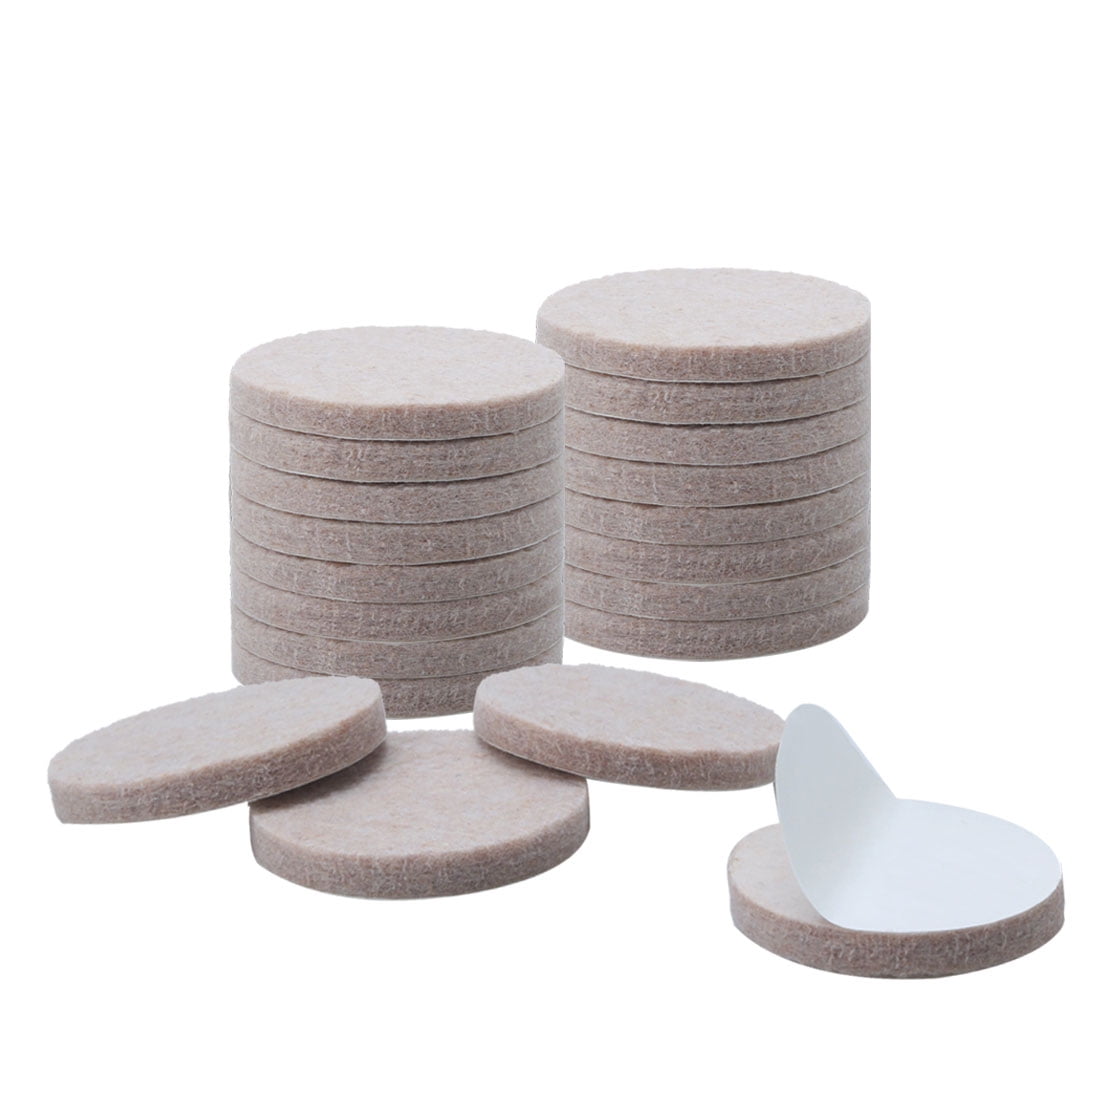 Details about   Chair Leg Protector Felt Pads FUZZ FREE Kleen Freak 8 pc Floor Protector Pads 